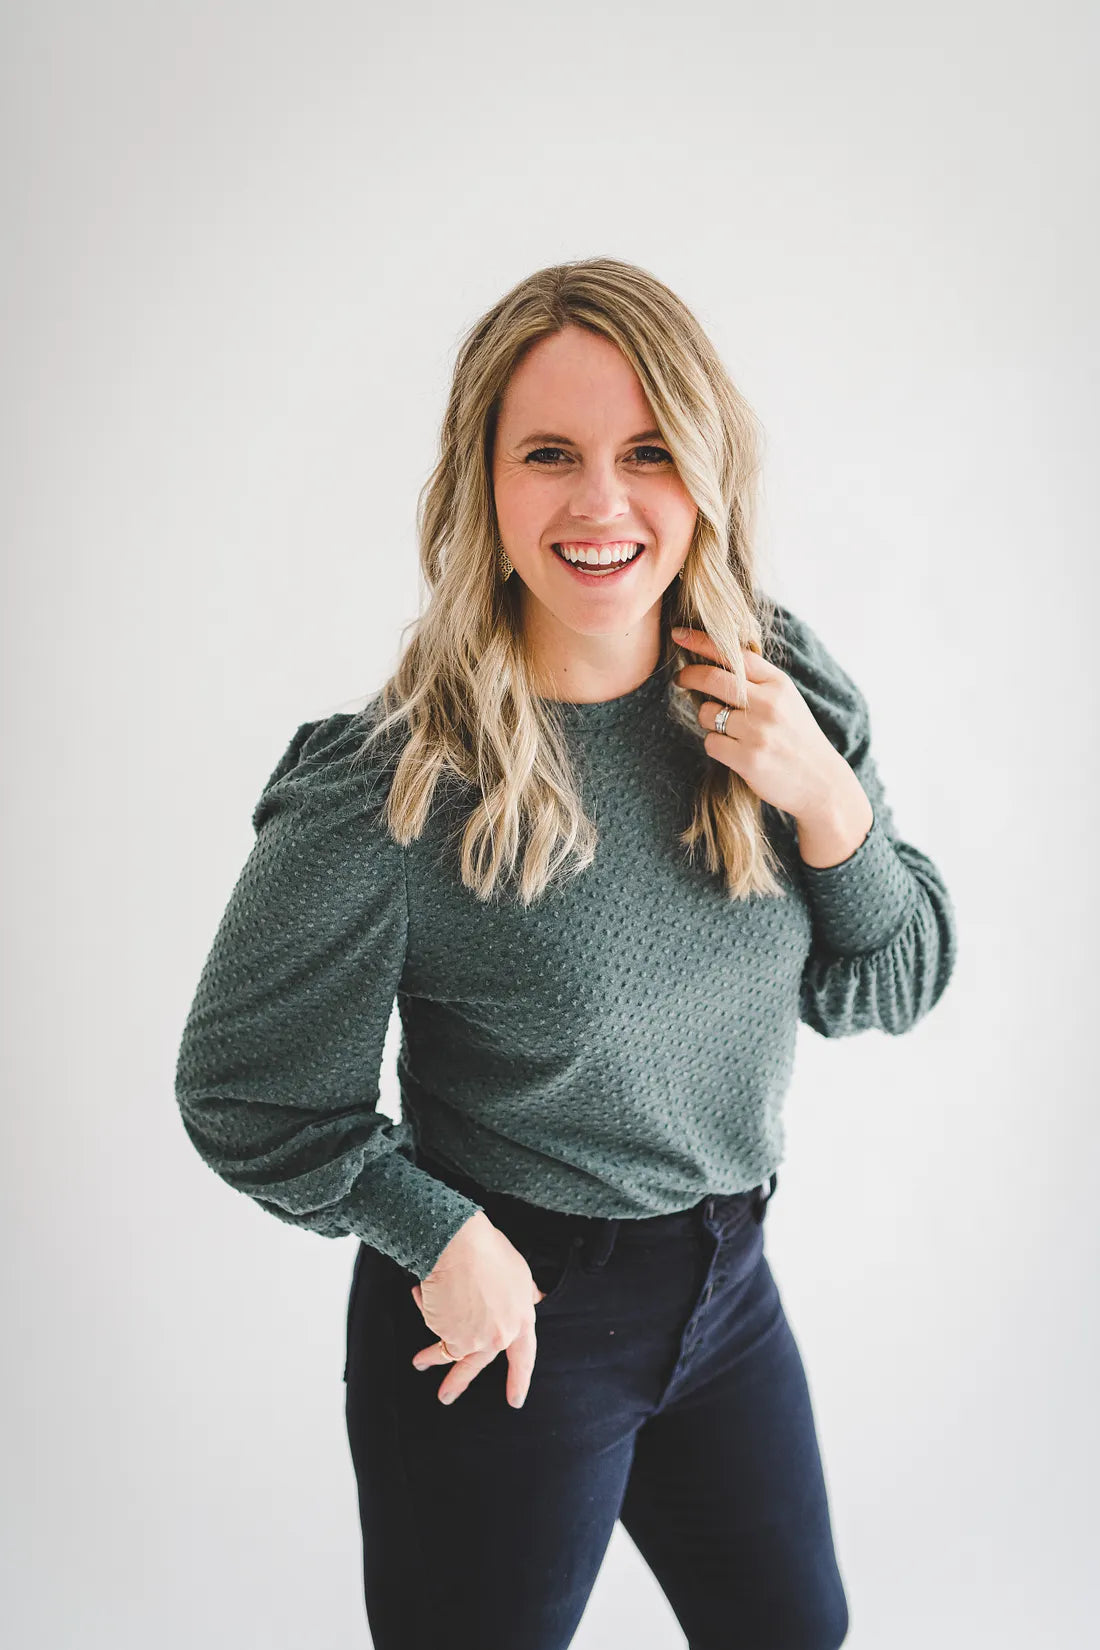 Women In Wellness: Alexa Schirm Of The Living Well On The Five Lifestyle Tweaks That Will Help Support People’s Journey Towards Better Wellbeing